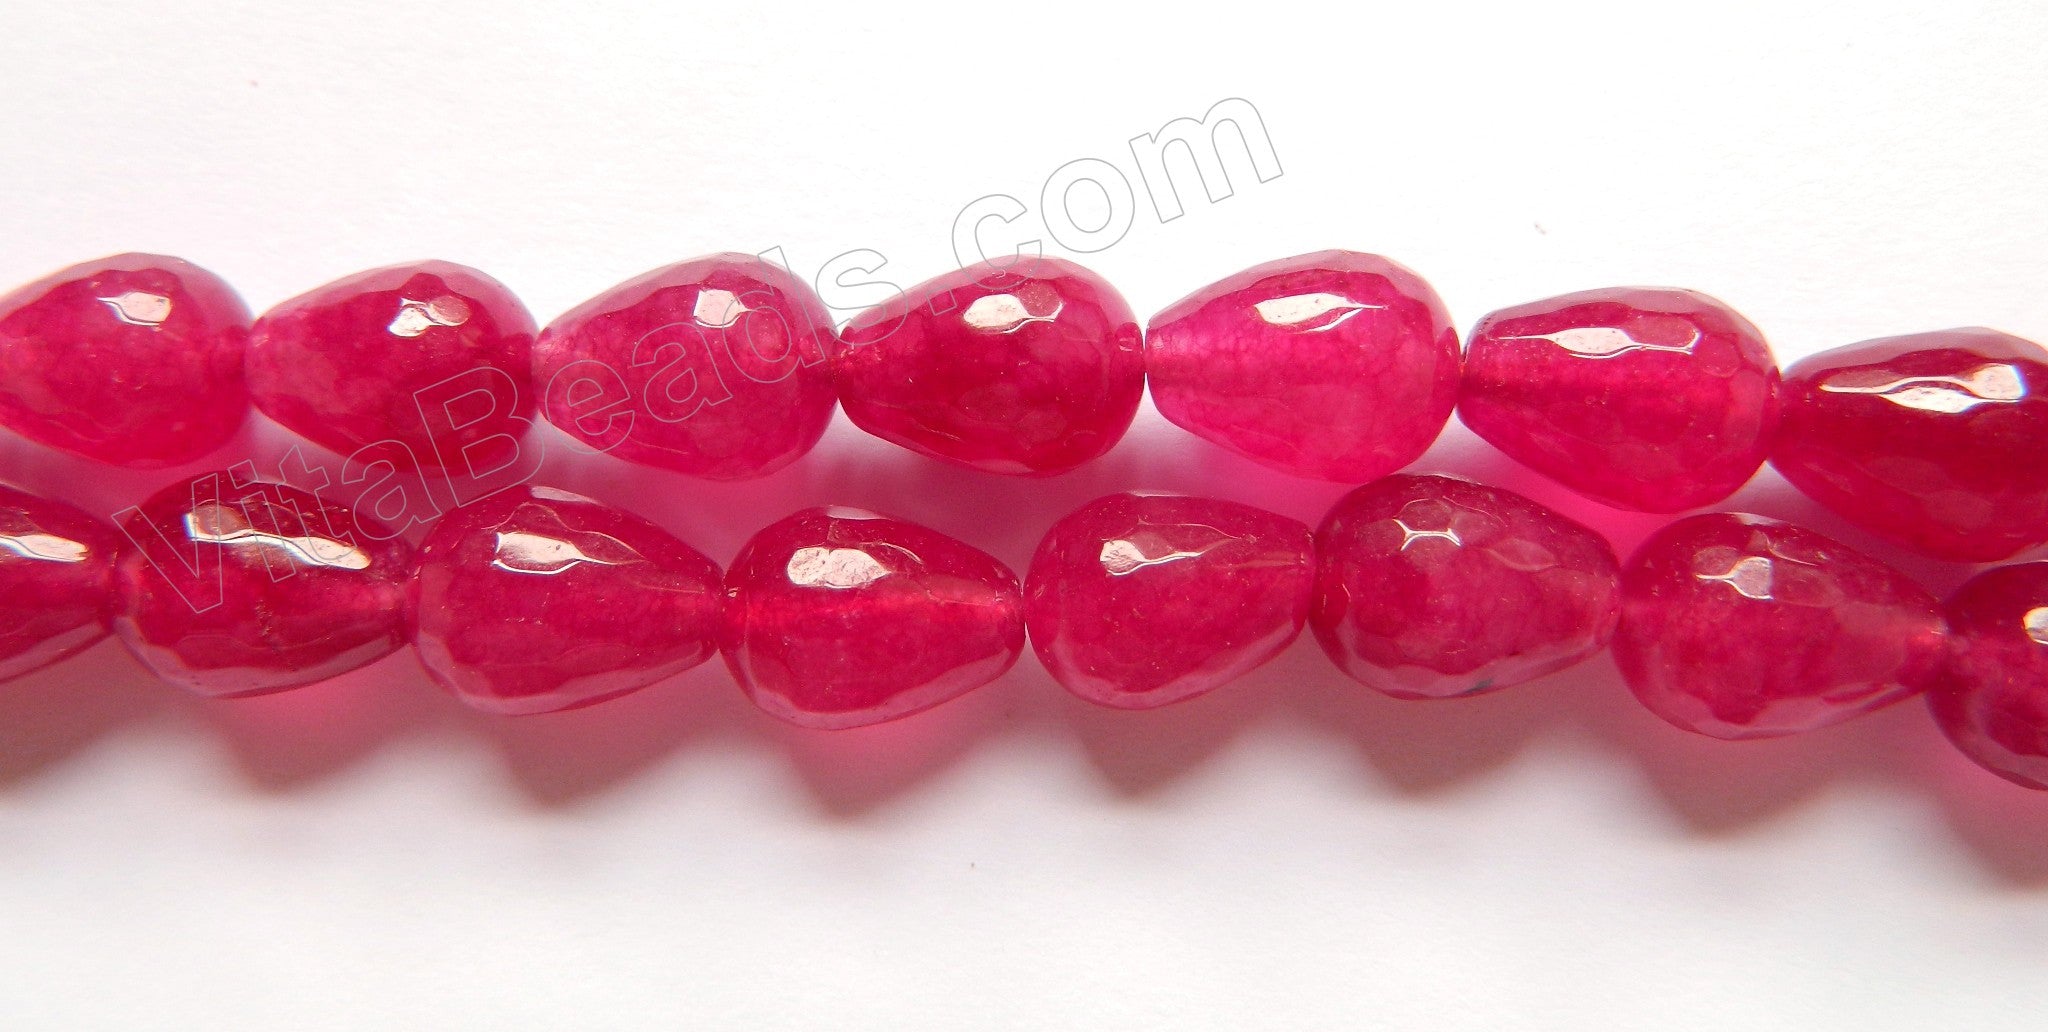 Cherry Win. Jade  -  10x14mm Faceted Drops  16"